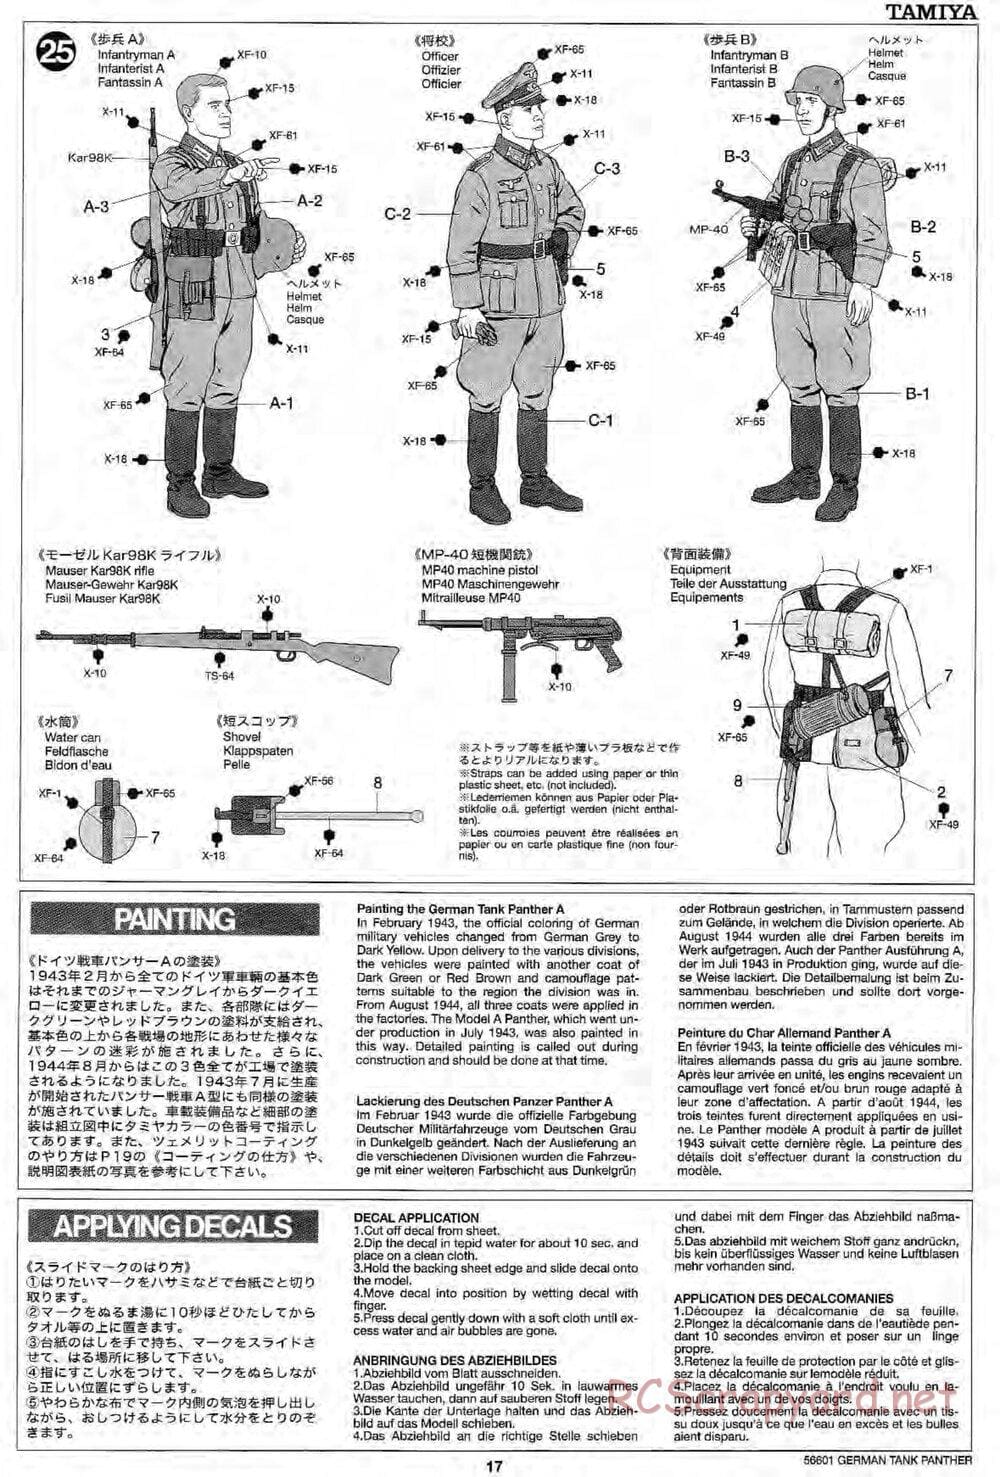 Tamiya - German Tank Panther A - 1/25 Scale Chassis - Manual - Page 17